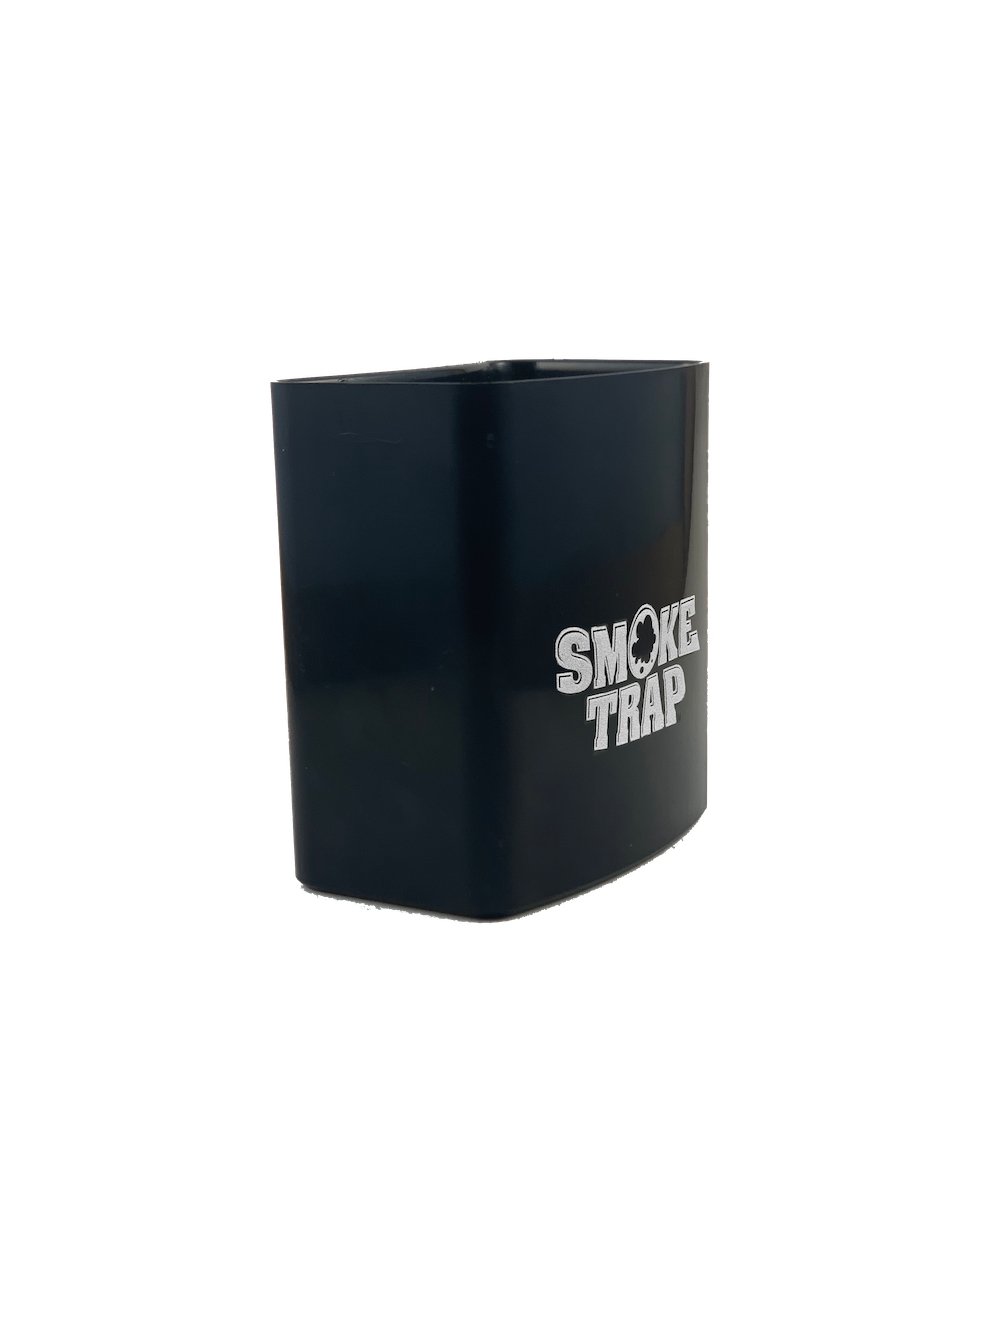 Smoke Trap + | Personal Air Filter (Sploof) - Eco Replaceable Filters - Long Lasting Smoke Filter 500+ Uses with Easy Exhale - Filters Have Zero